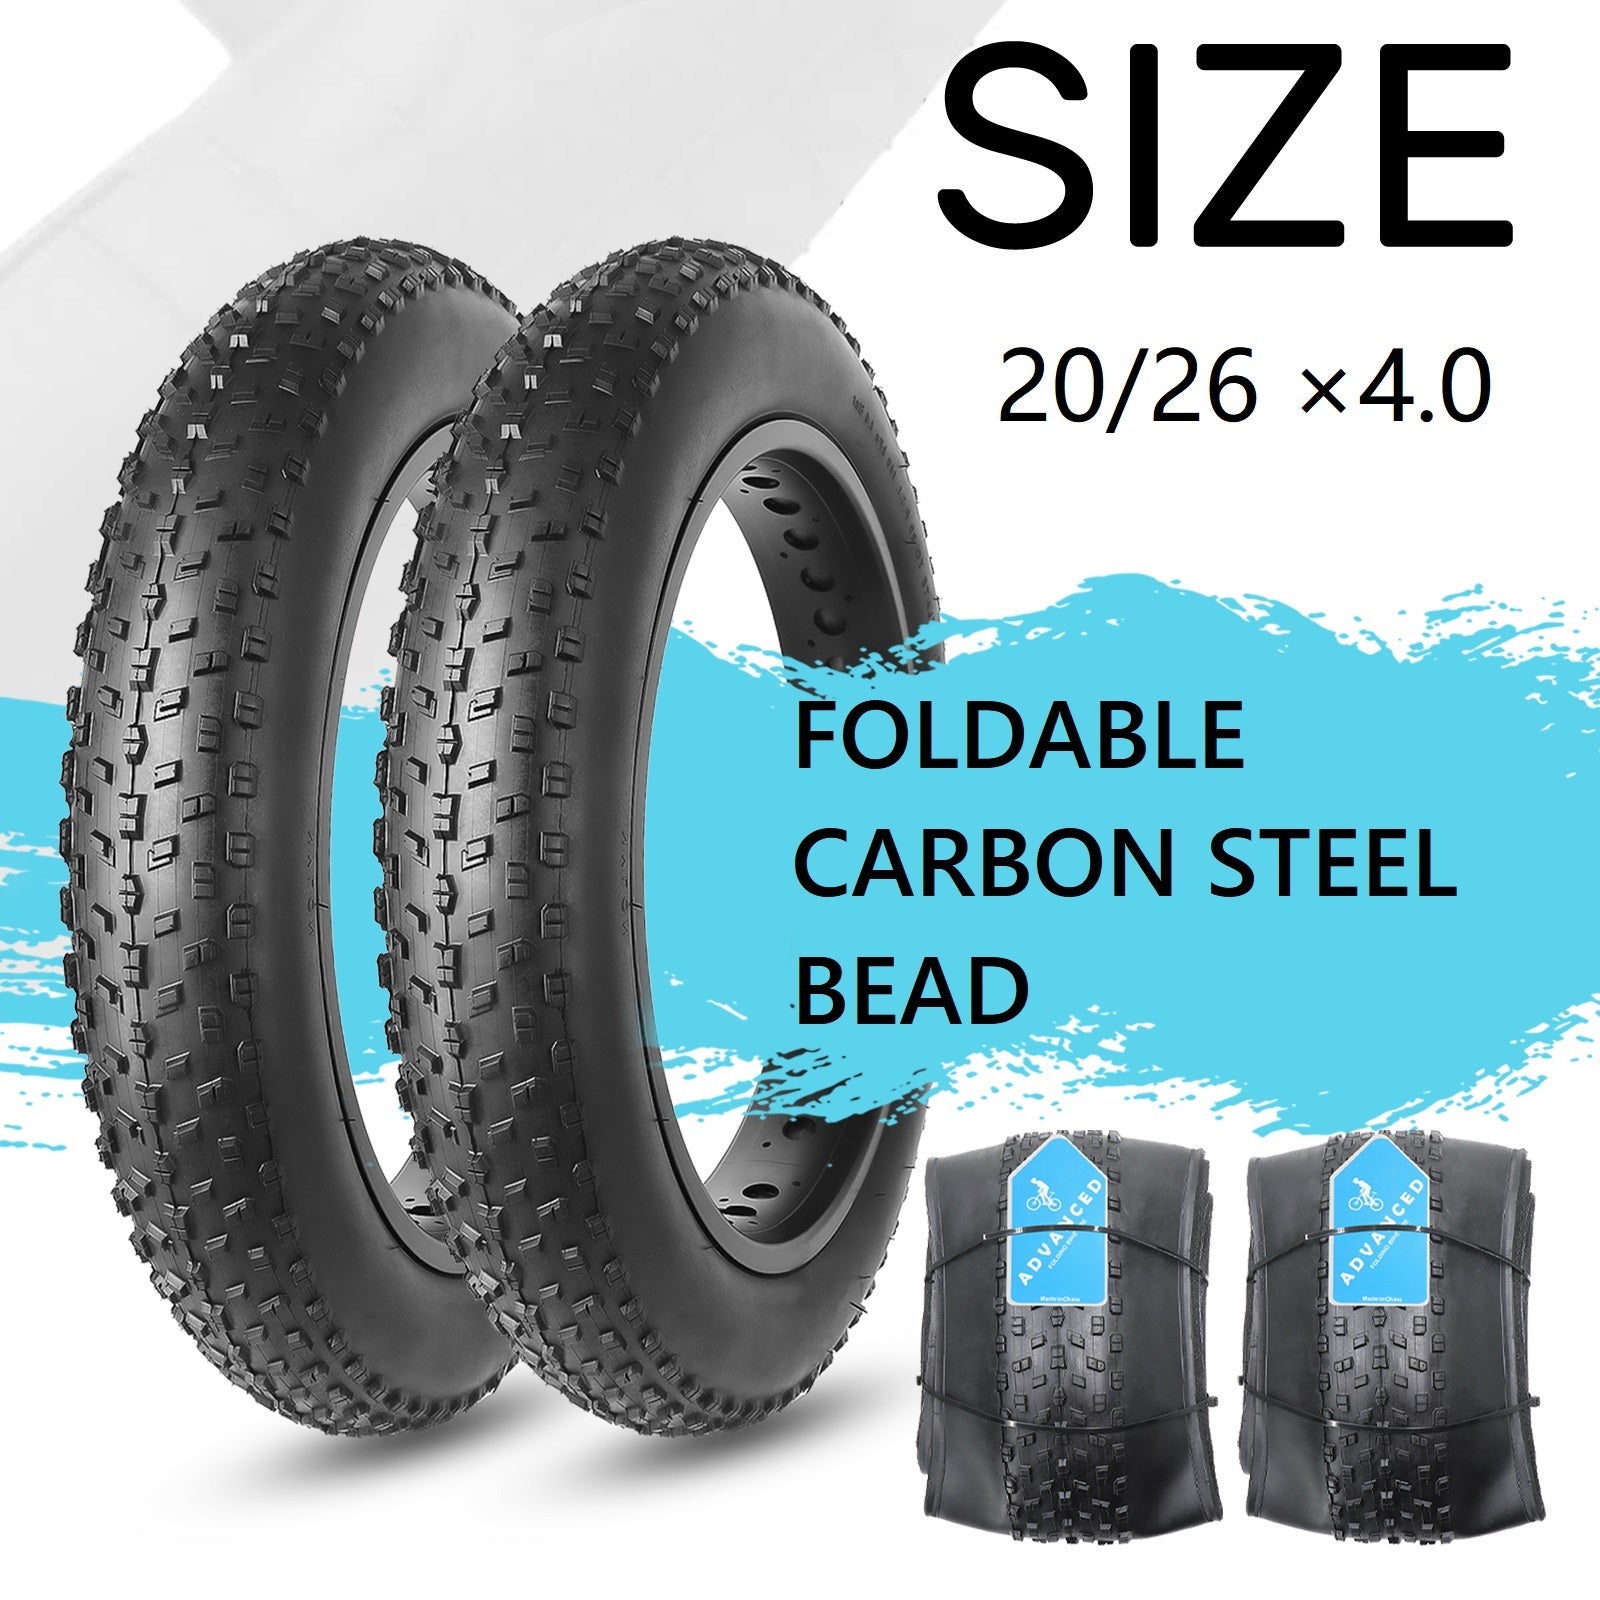 2 Pack Fat Tires Plus Inner Tubes Set 20/26x4.0 FOLDABLE CARBON STEEL BEAD